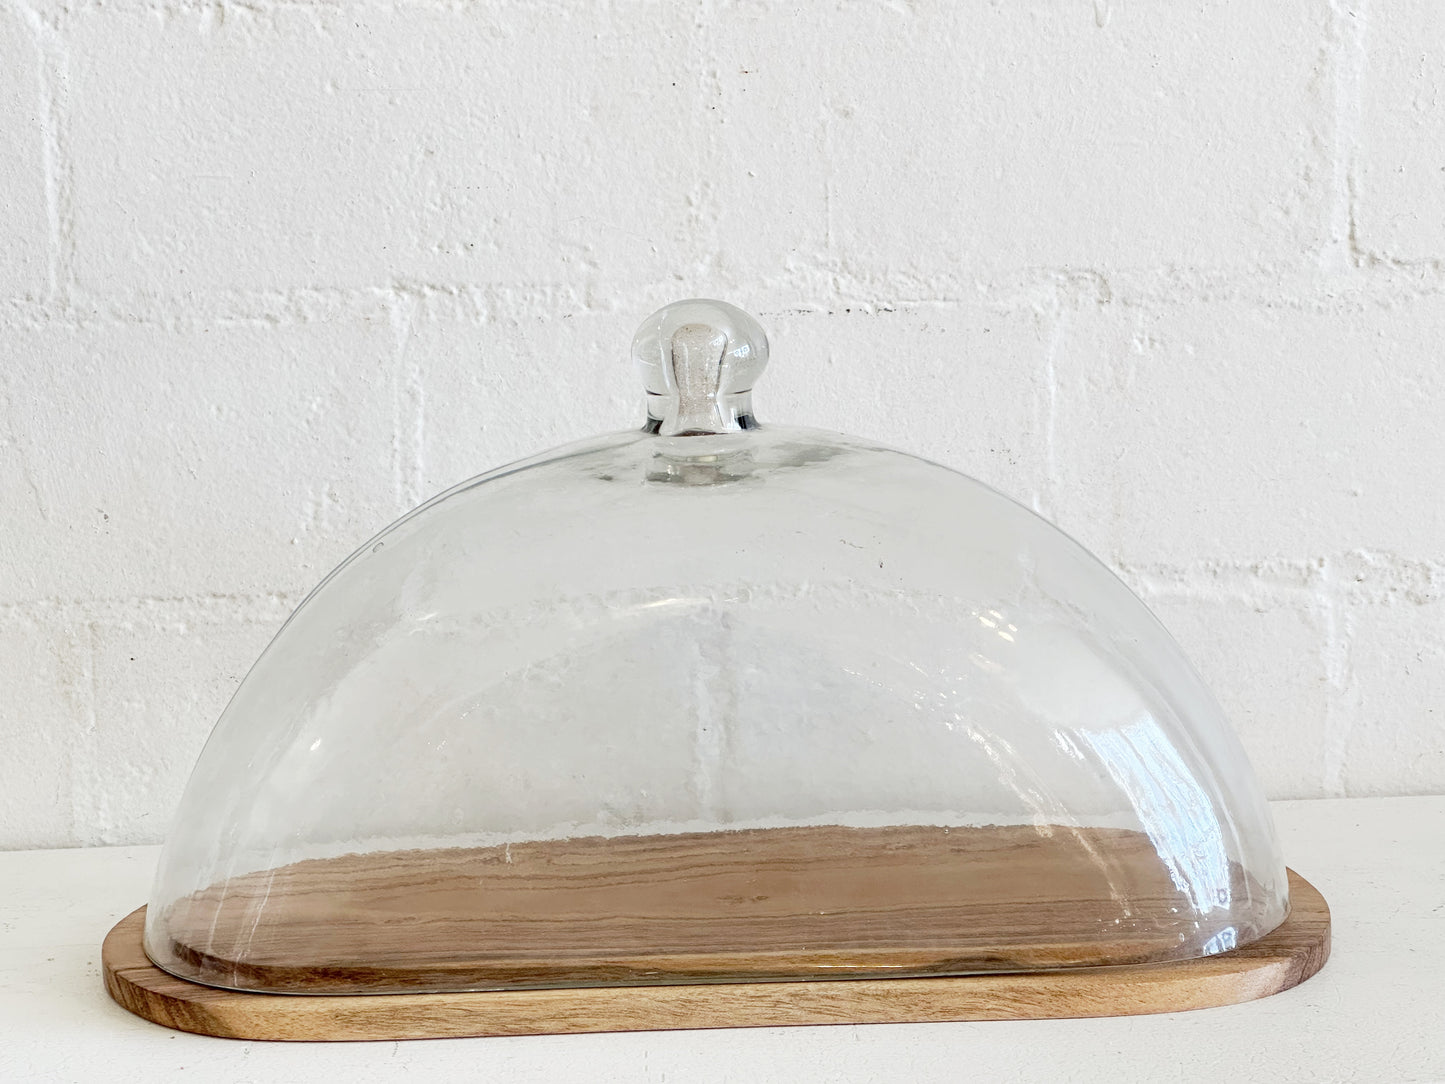 WOOD CAKE STAND WITH GLASS LID